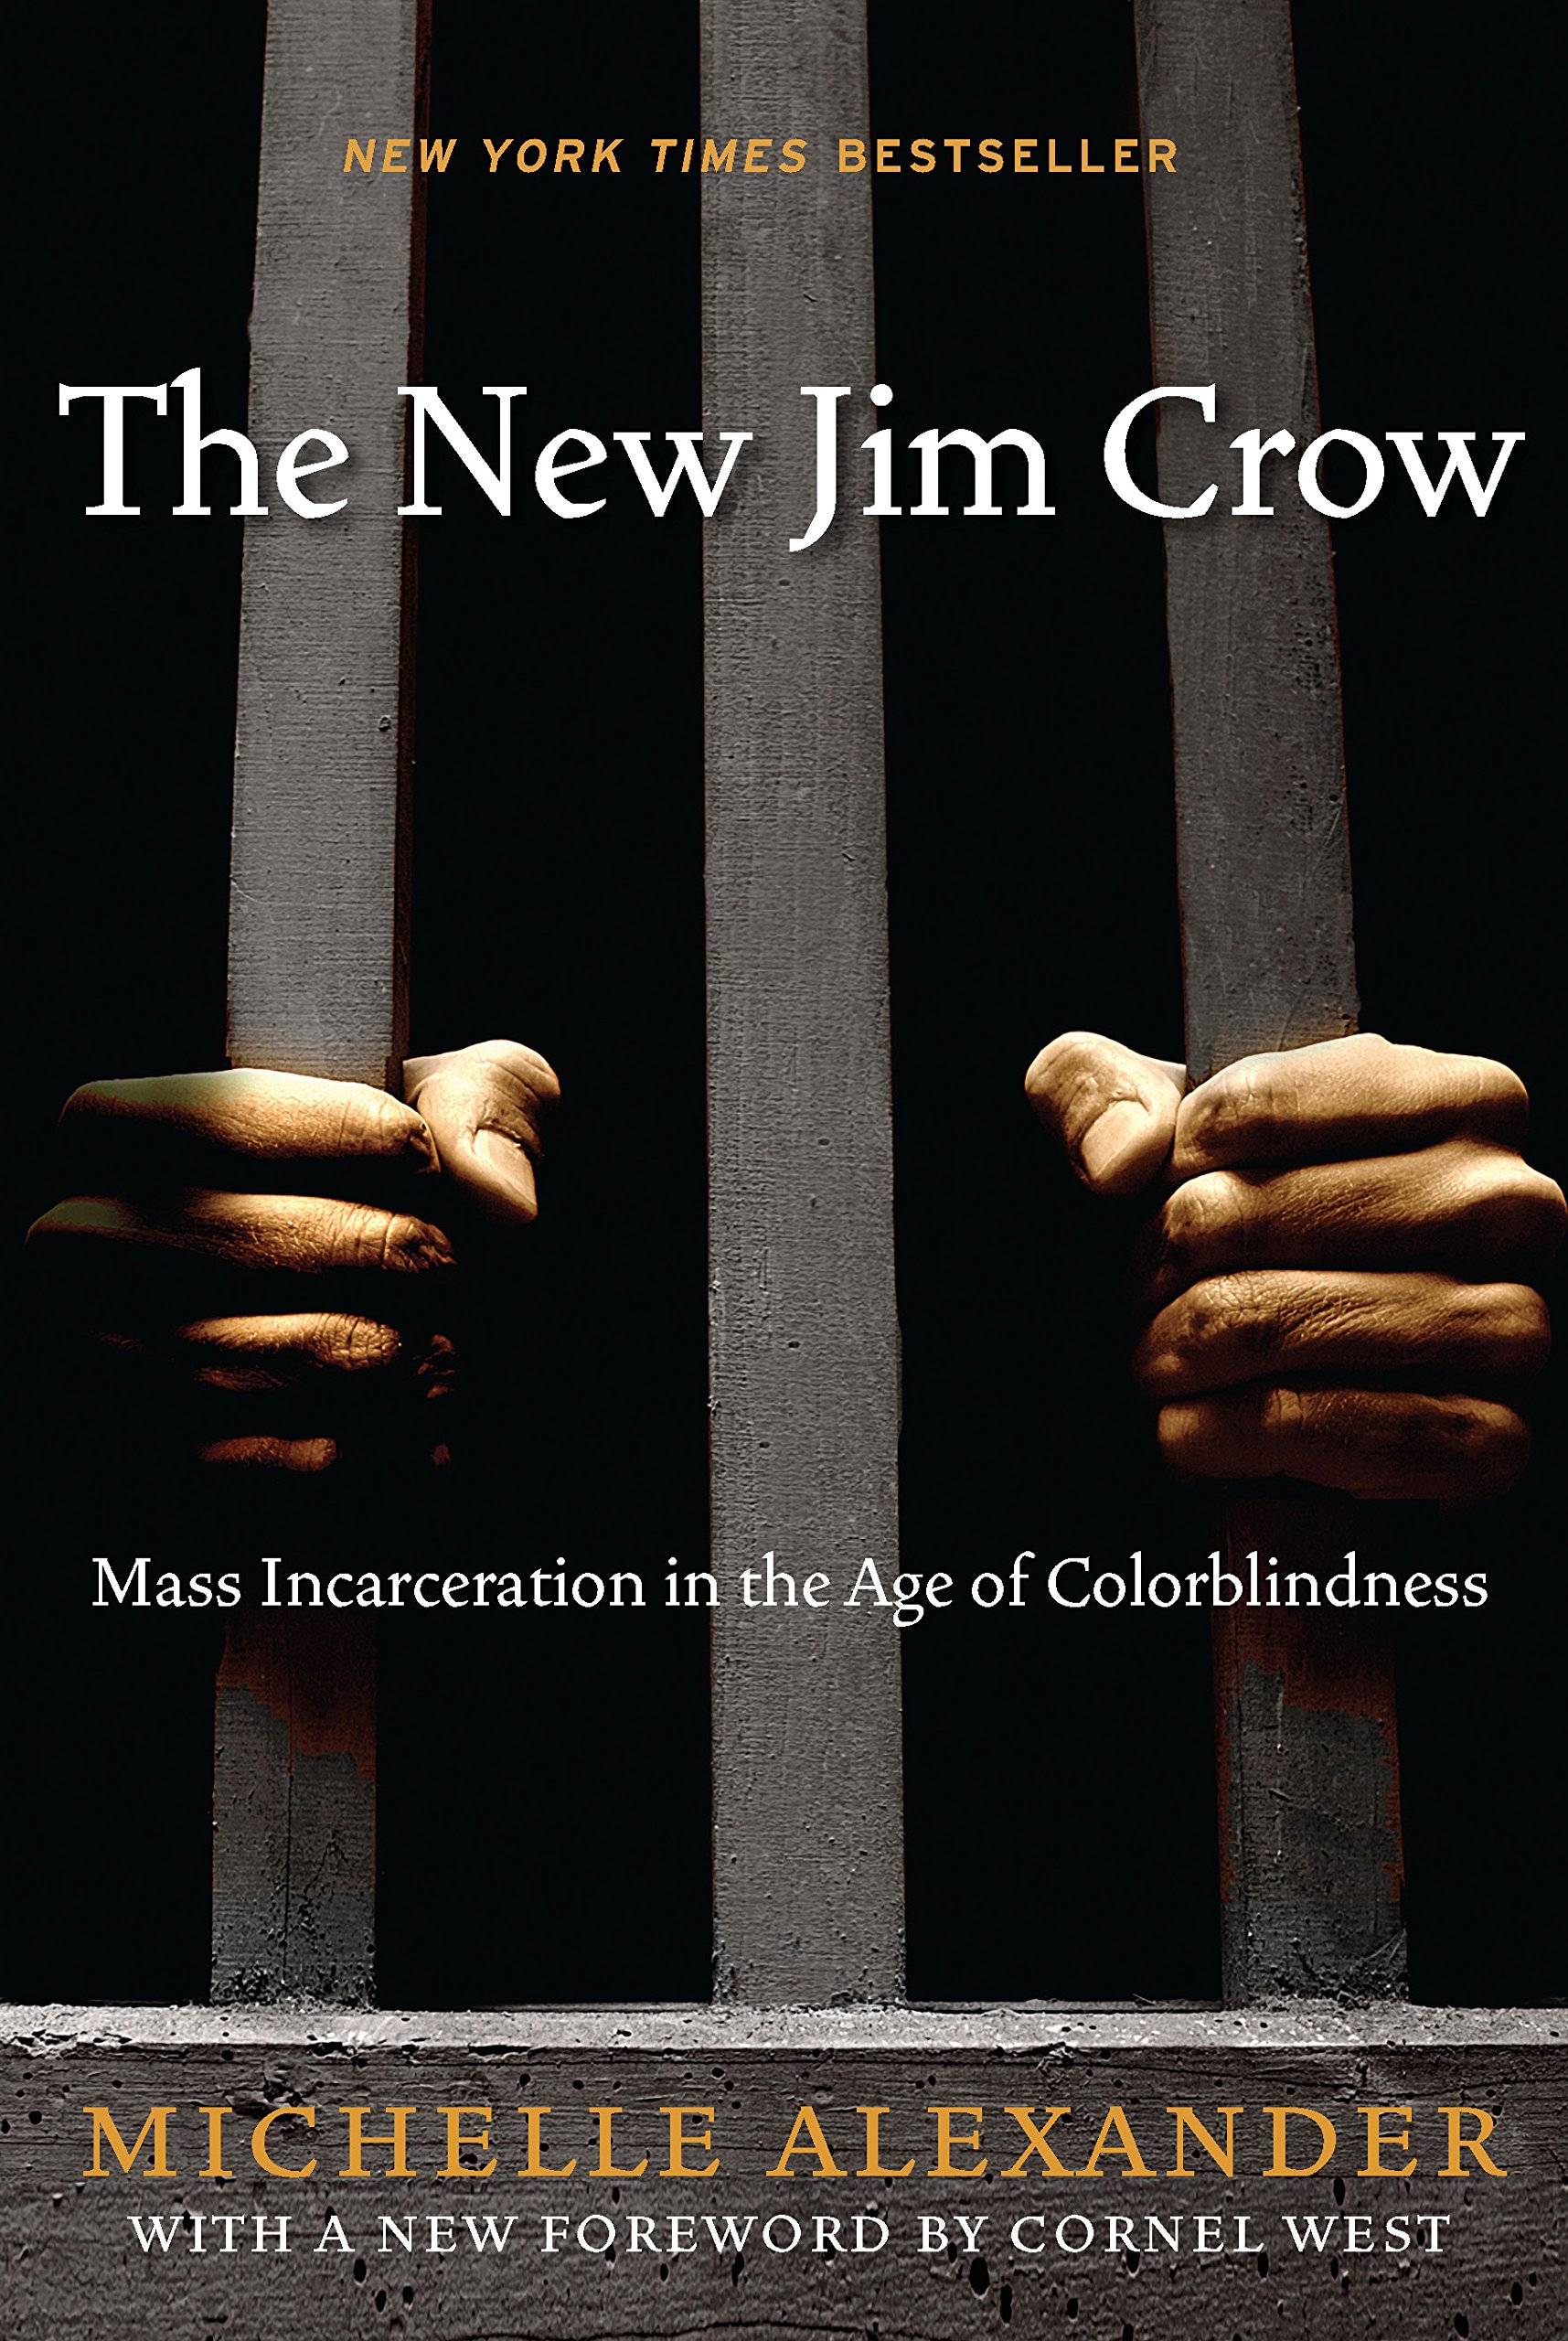 Black book cover with image of two hands holding onto prison bars, trapped behind them